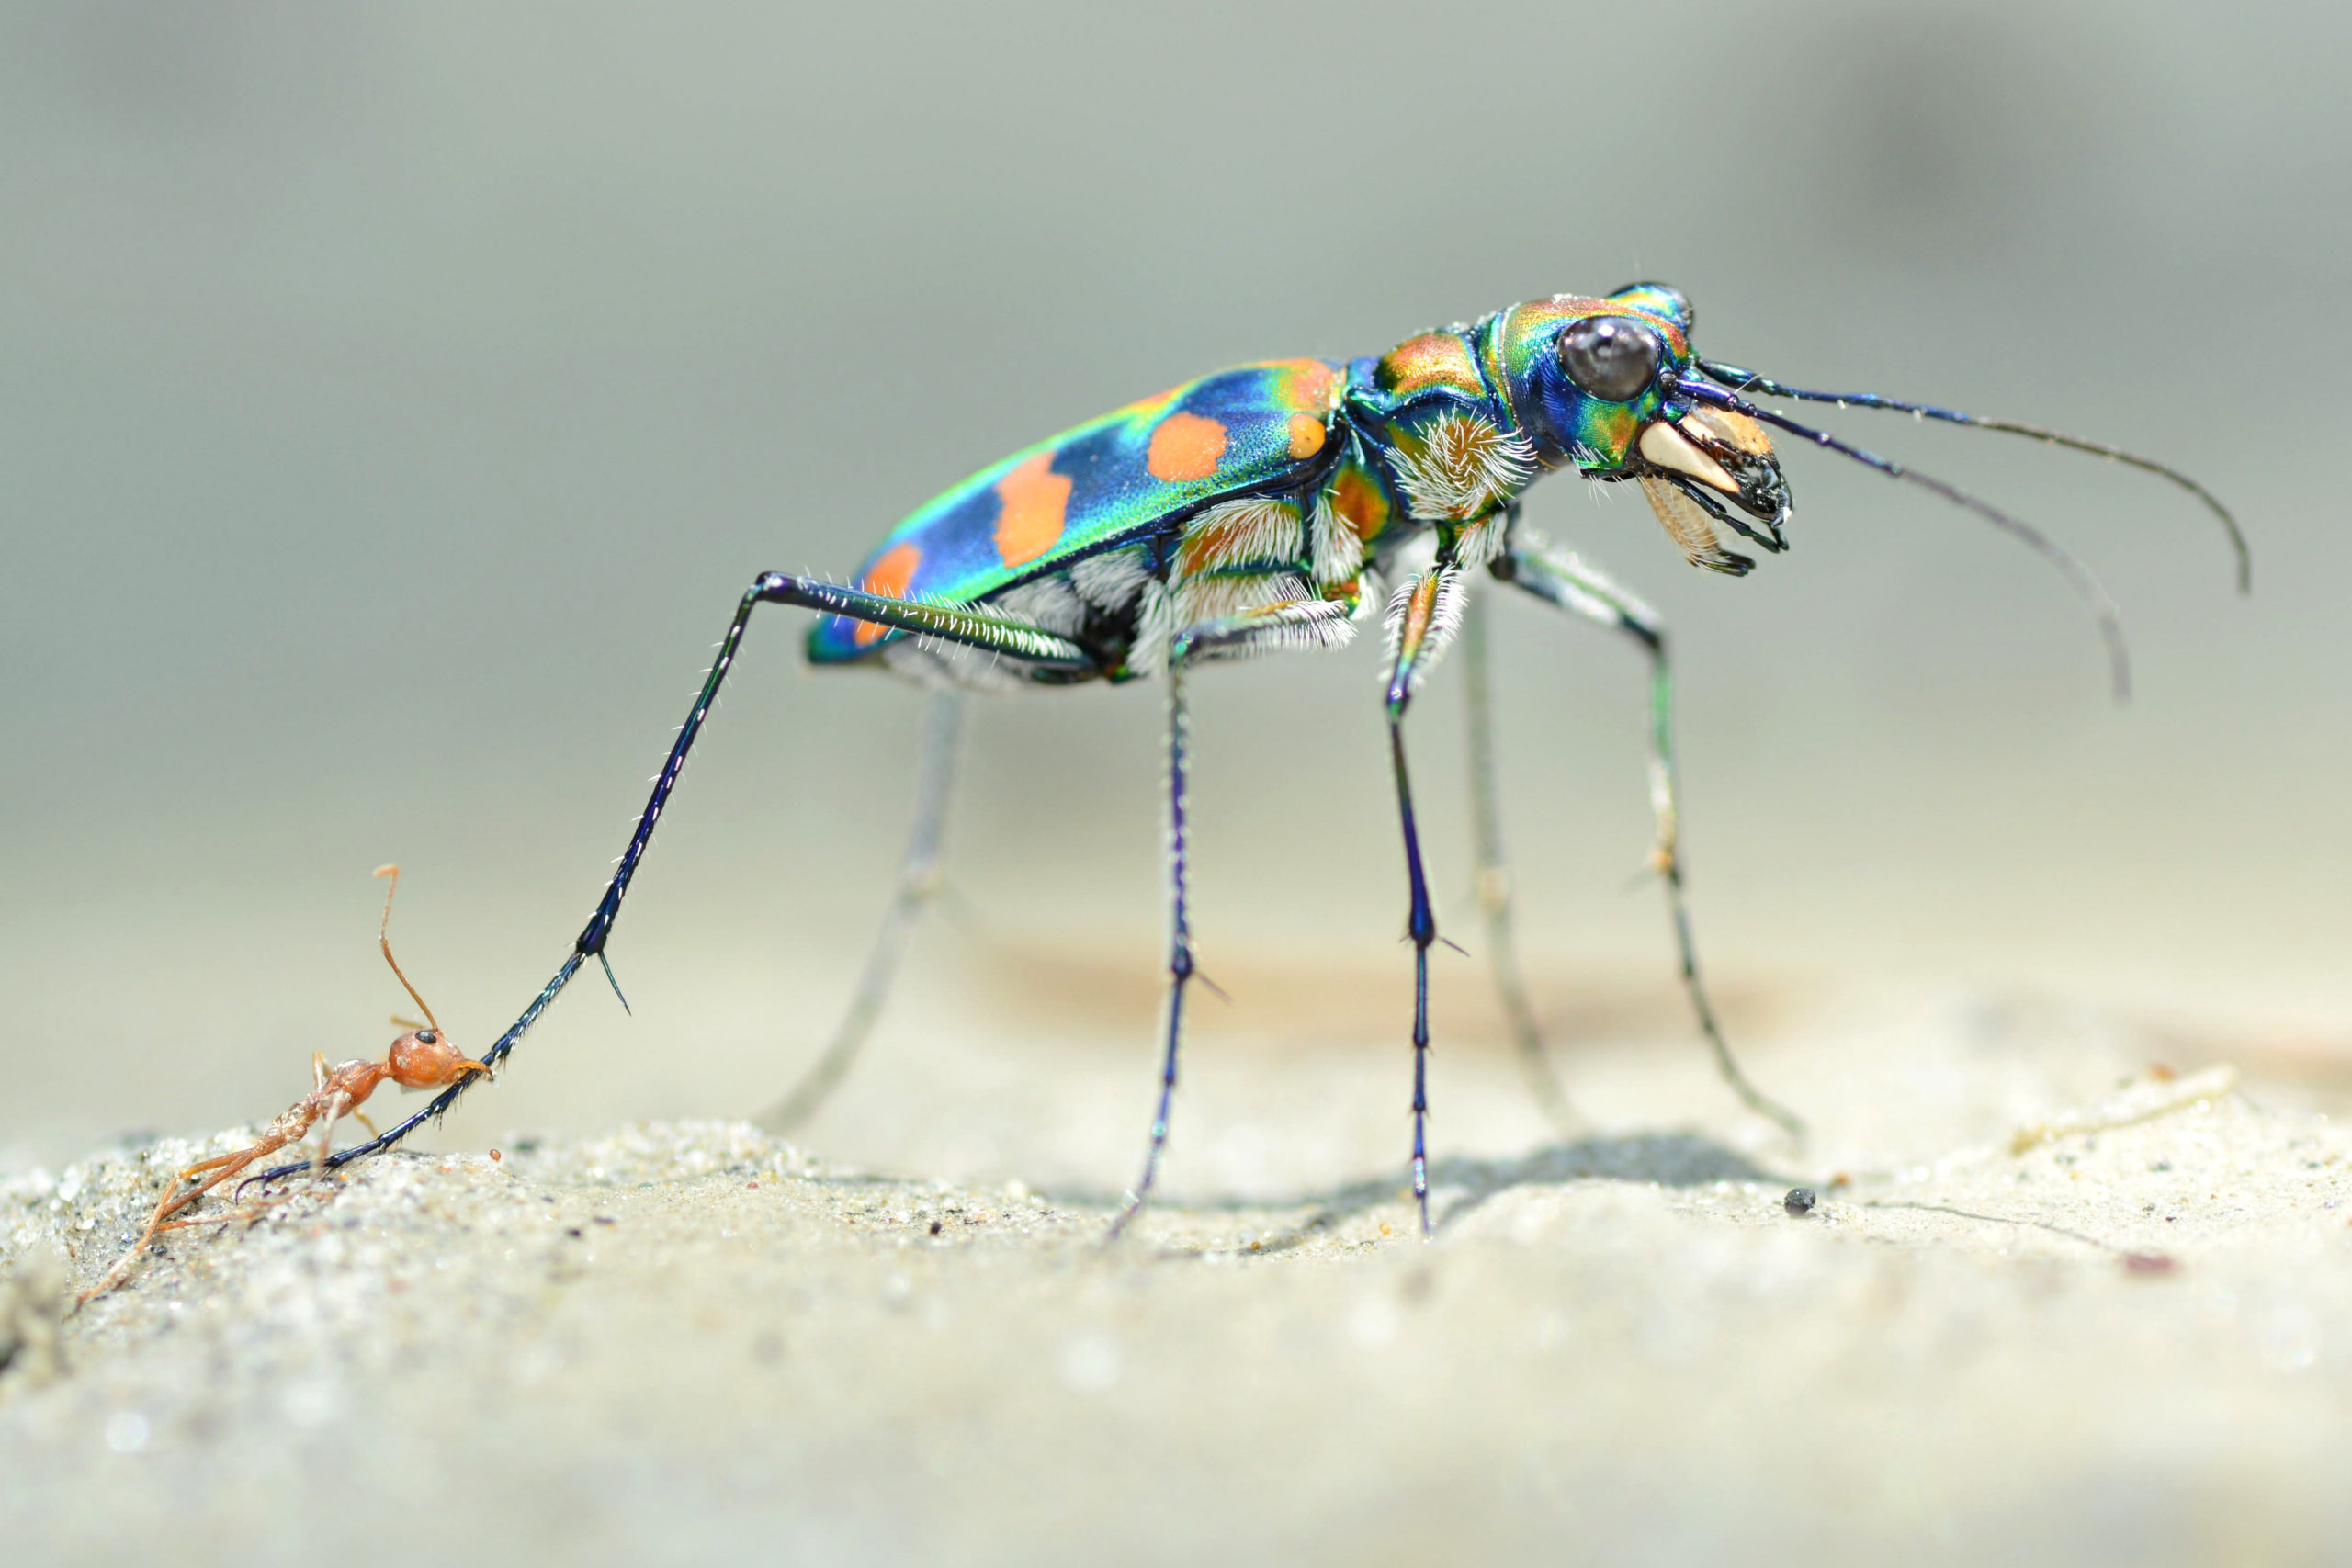 Tiger beetle and weaver ant.